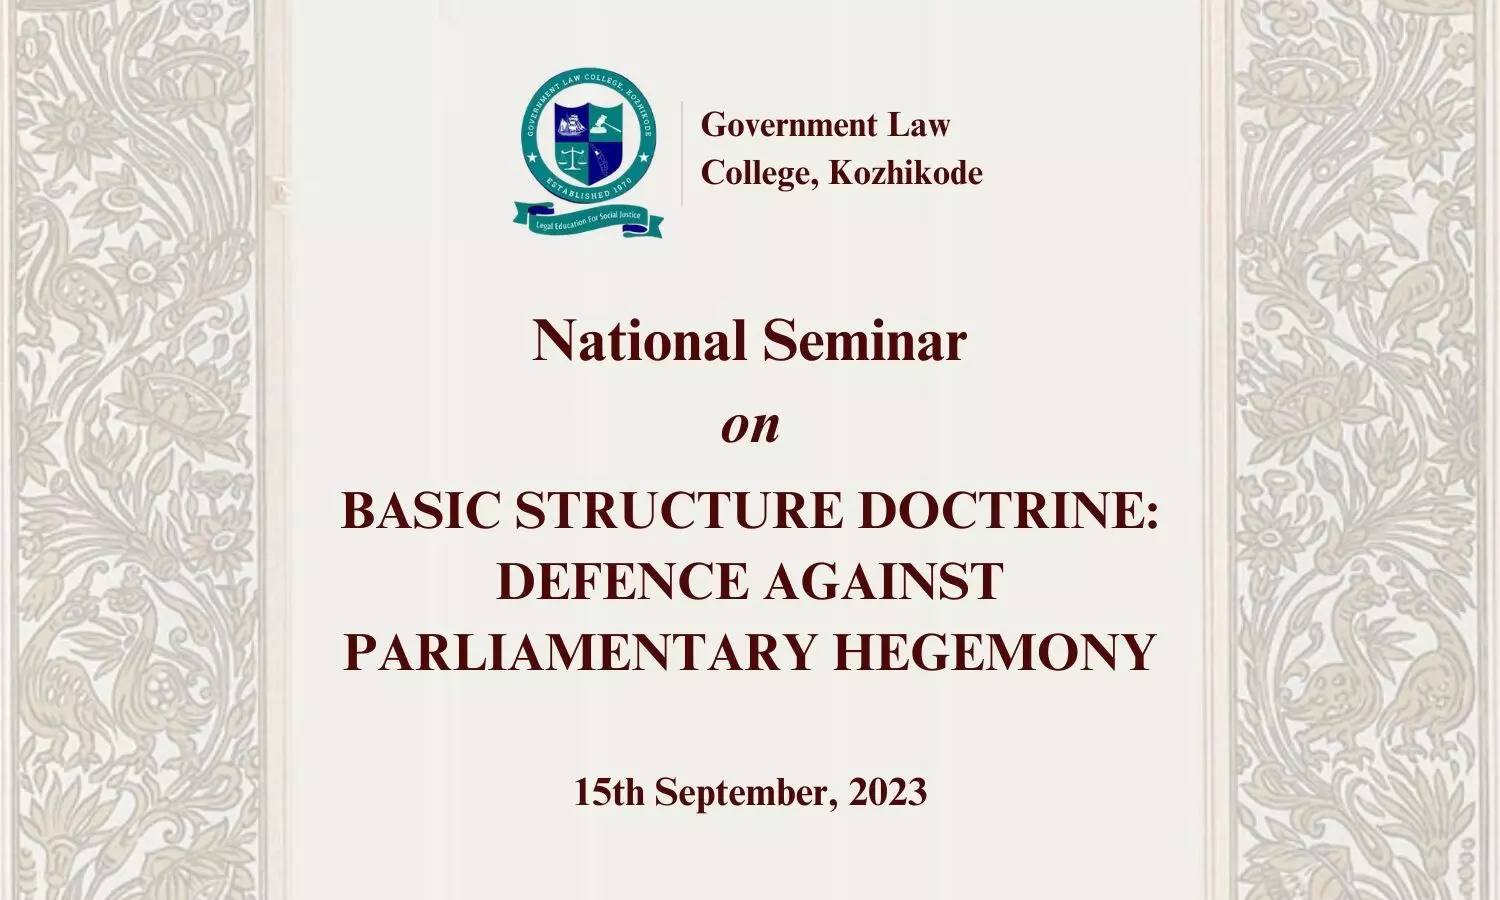 Call for Papers: National Seminar on Basic Structure Doctrine | Government Law College Kozhikode